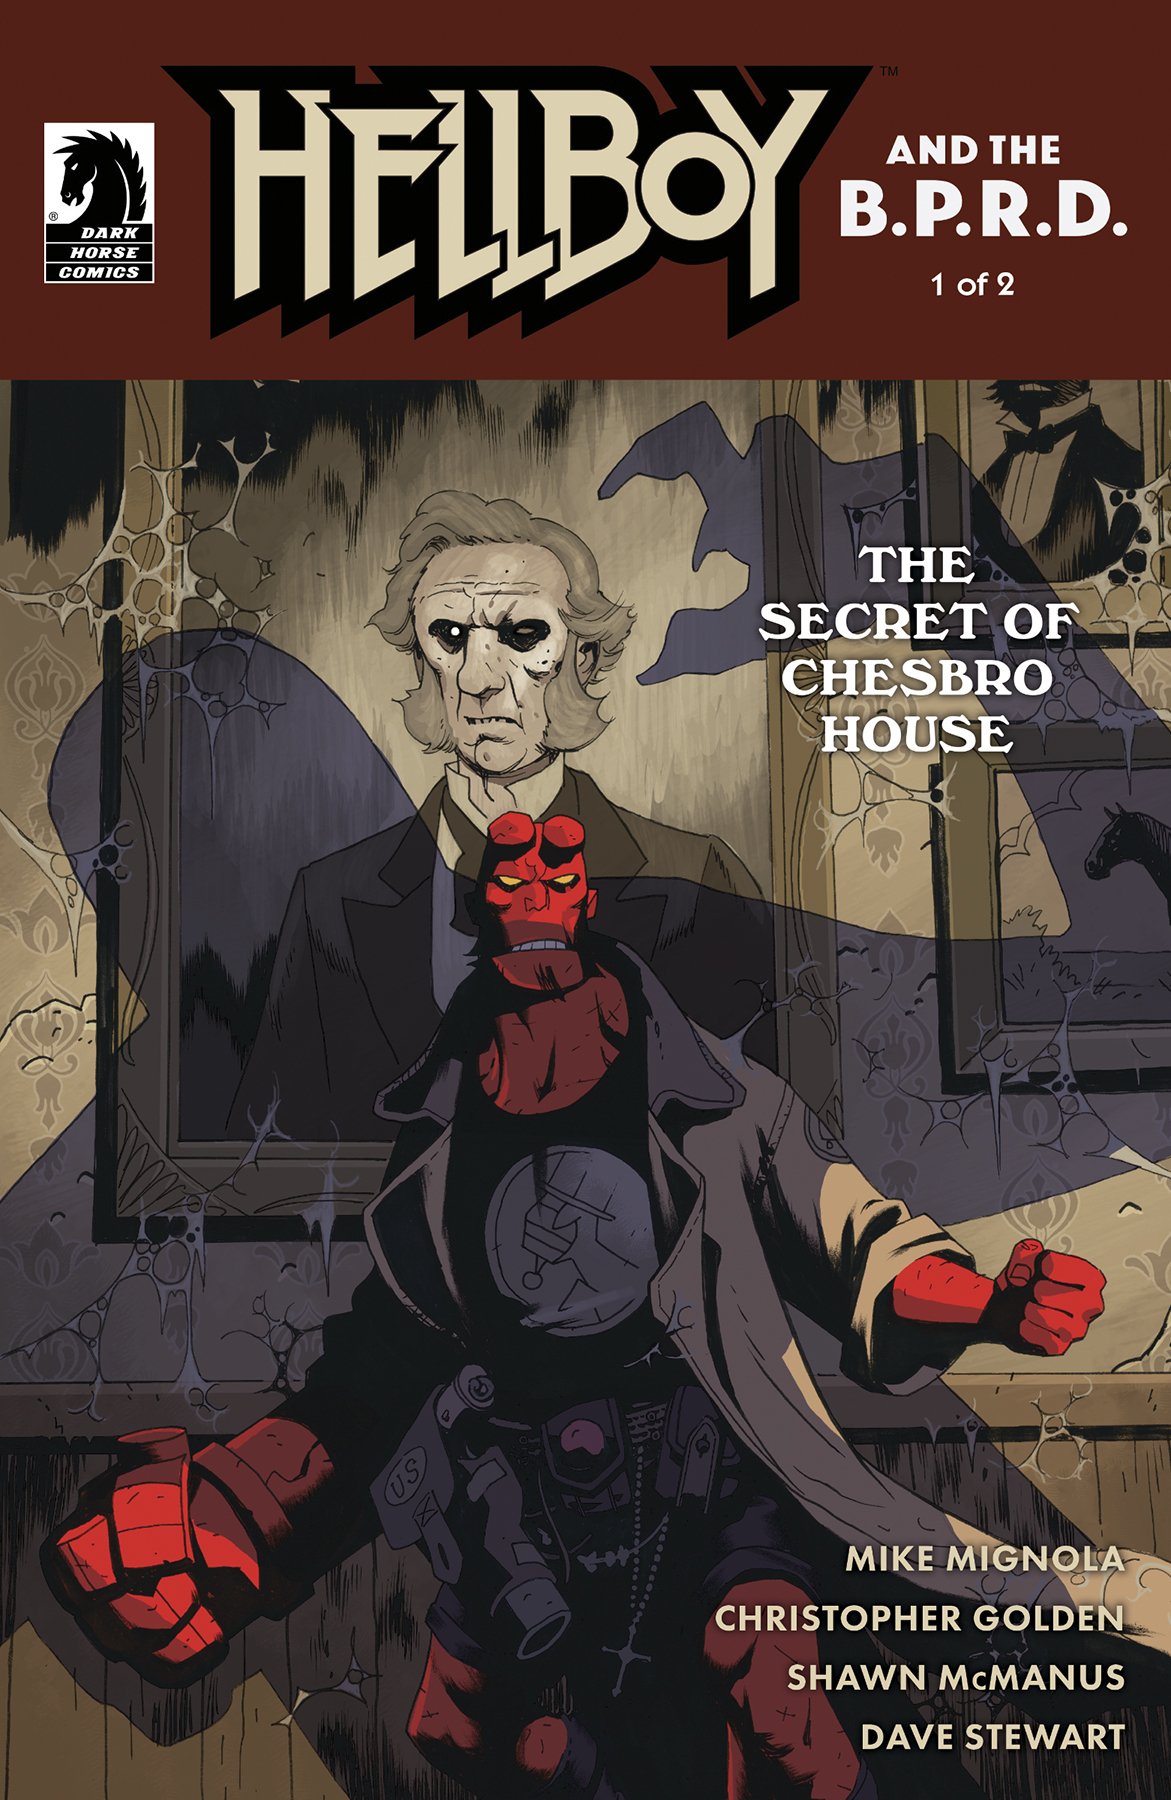 Hellboy & the B.P.R.D. Ongoing #43 Secret of Chesbro House #1 Cover B Stenbeck (Of 2)